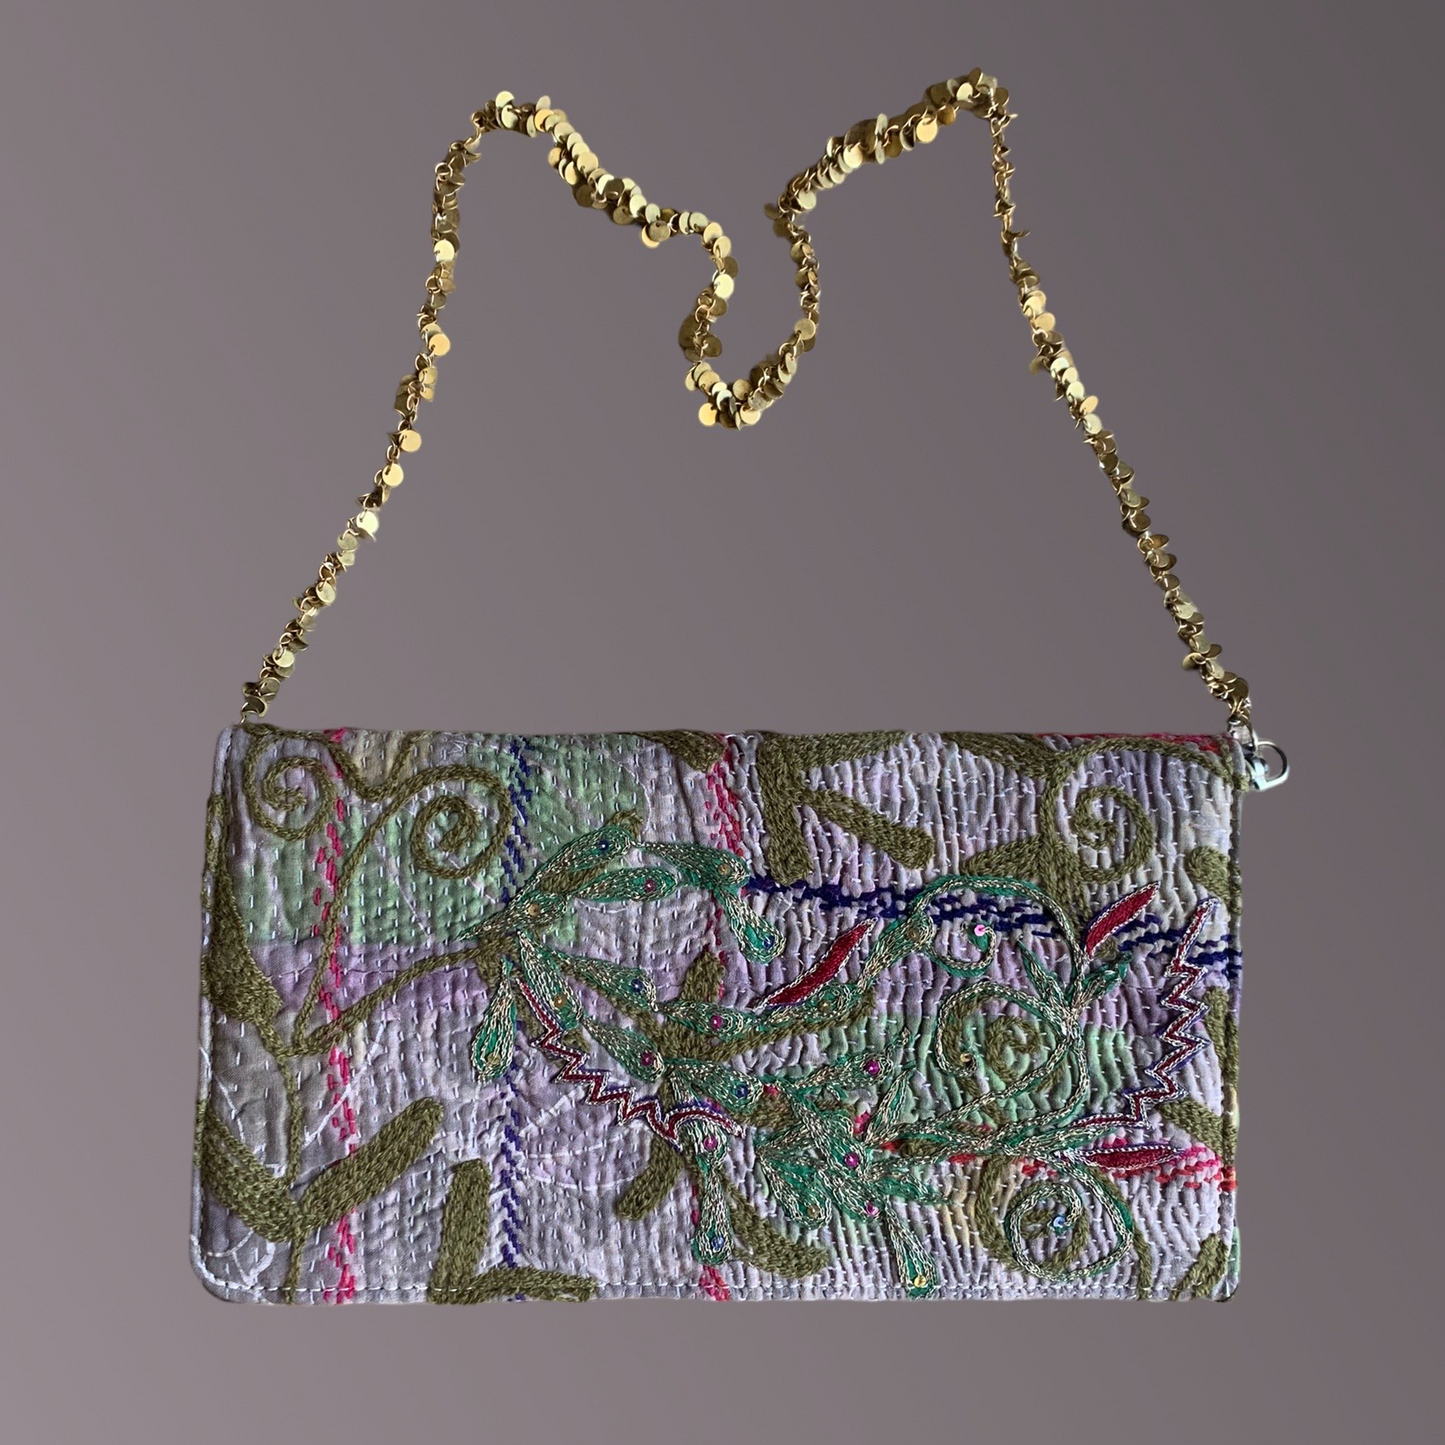 Joyful Vintage Fabric Clutch with Copper Disk Chain